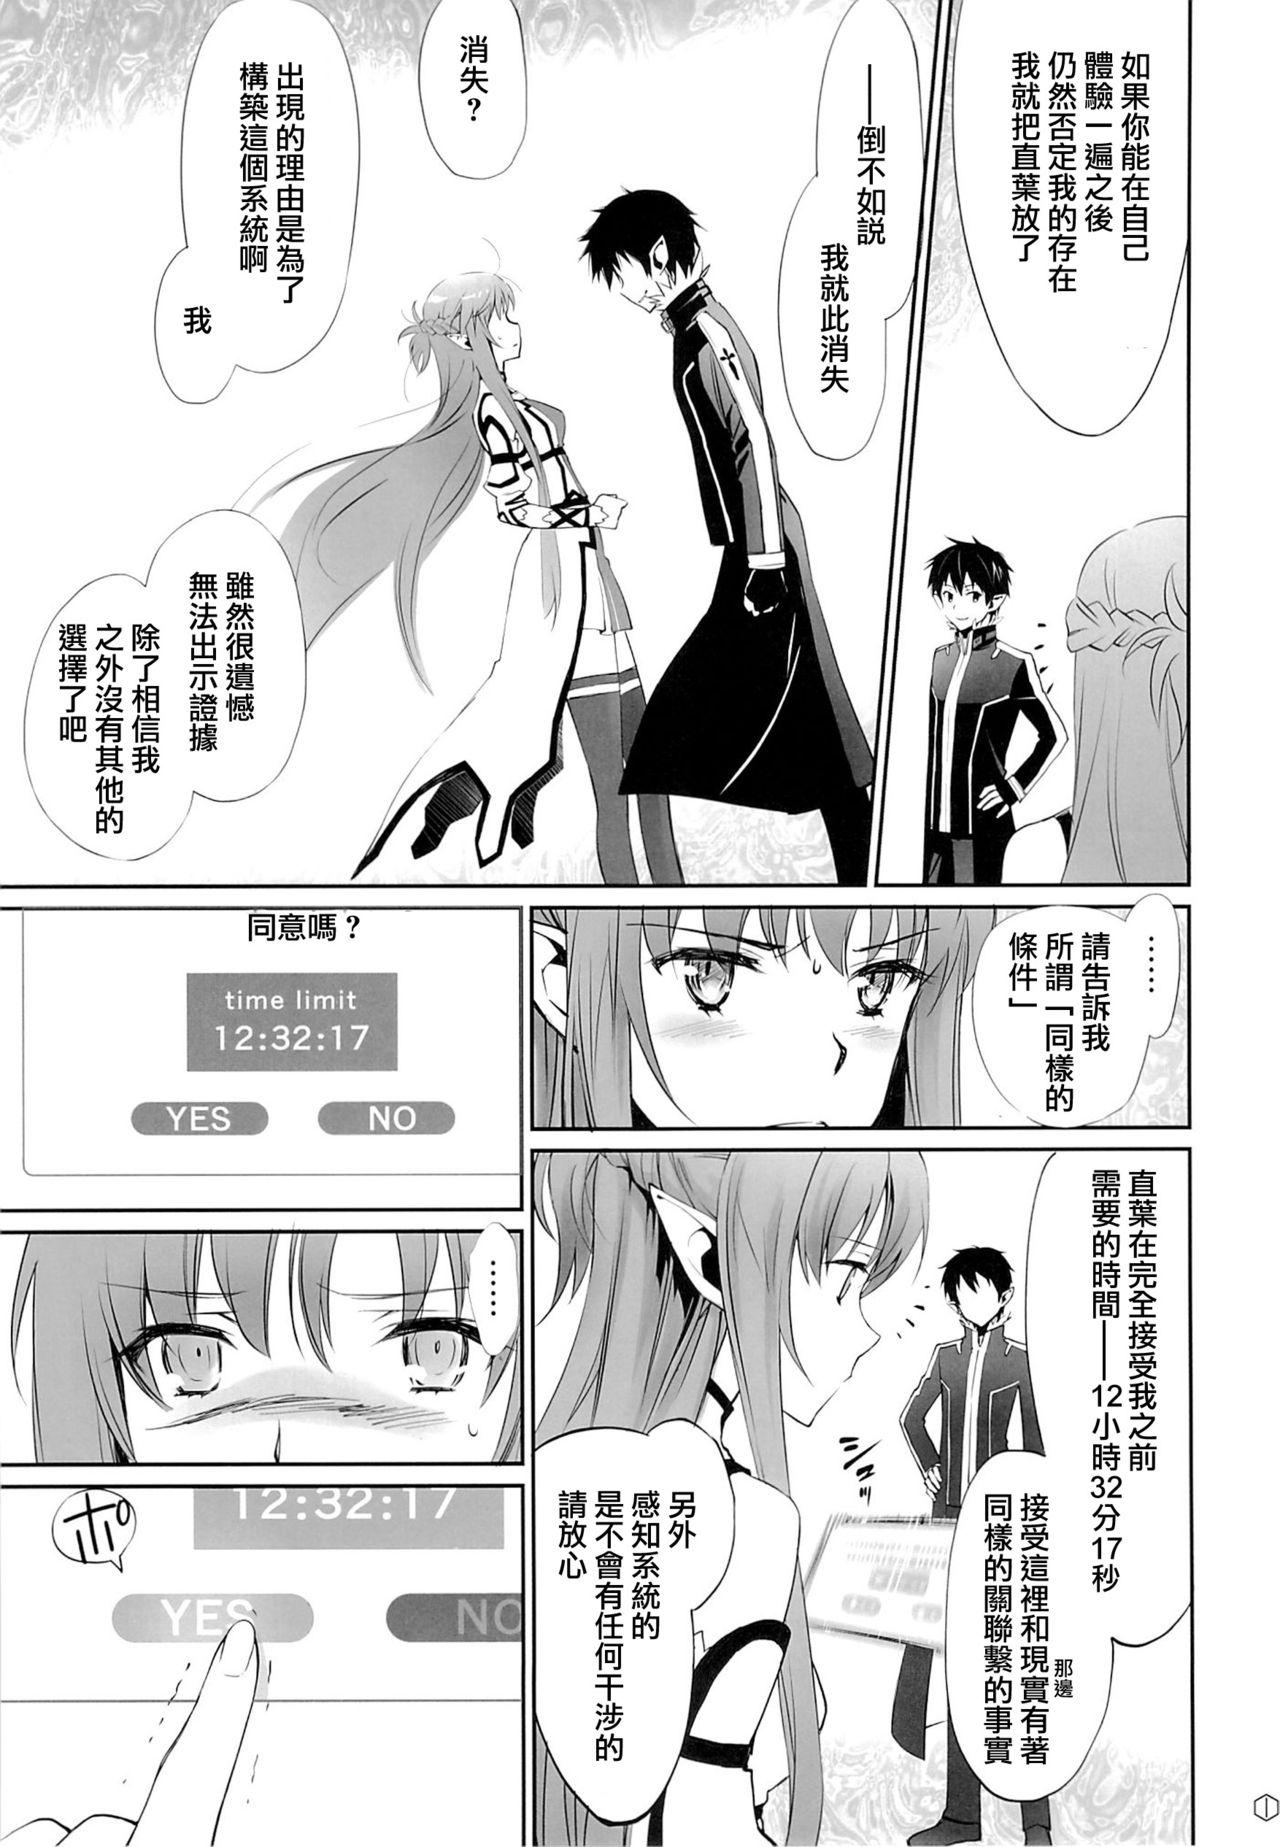 Chileno turnover - Sword art online College - Page 10